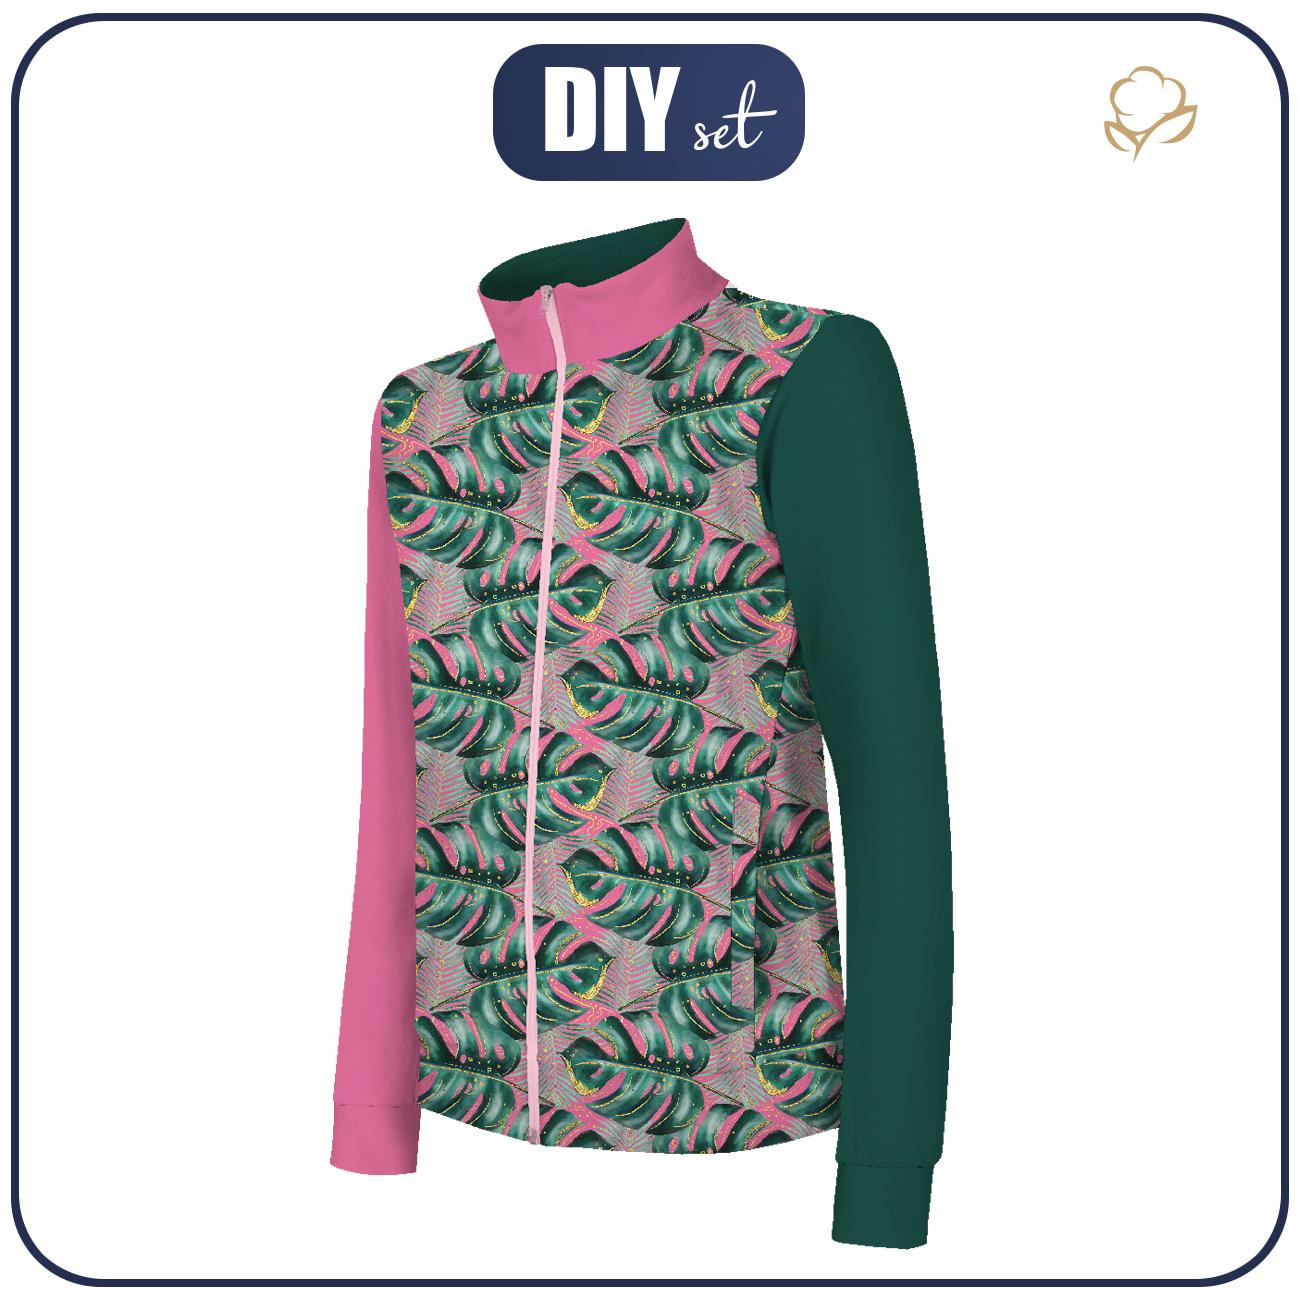 "MAX" CHILDREN'S TRAINING JACKET - MONSTERA no. 5 / pink - knit with short nap